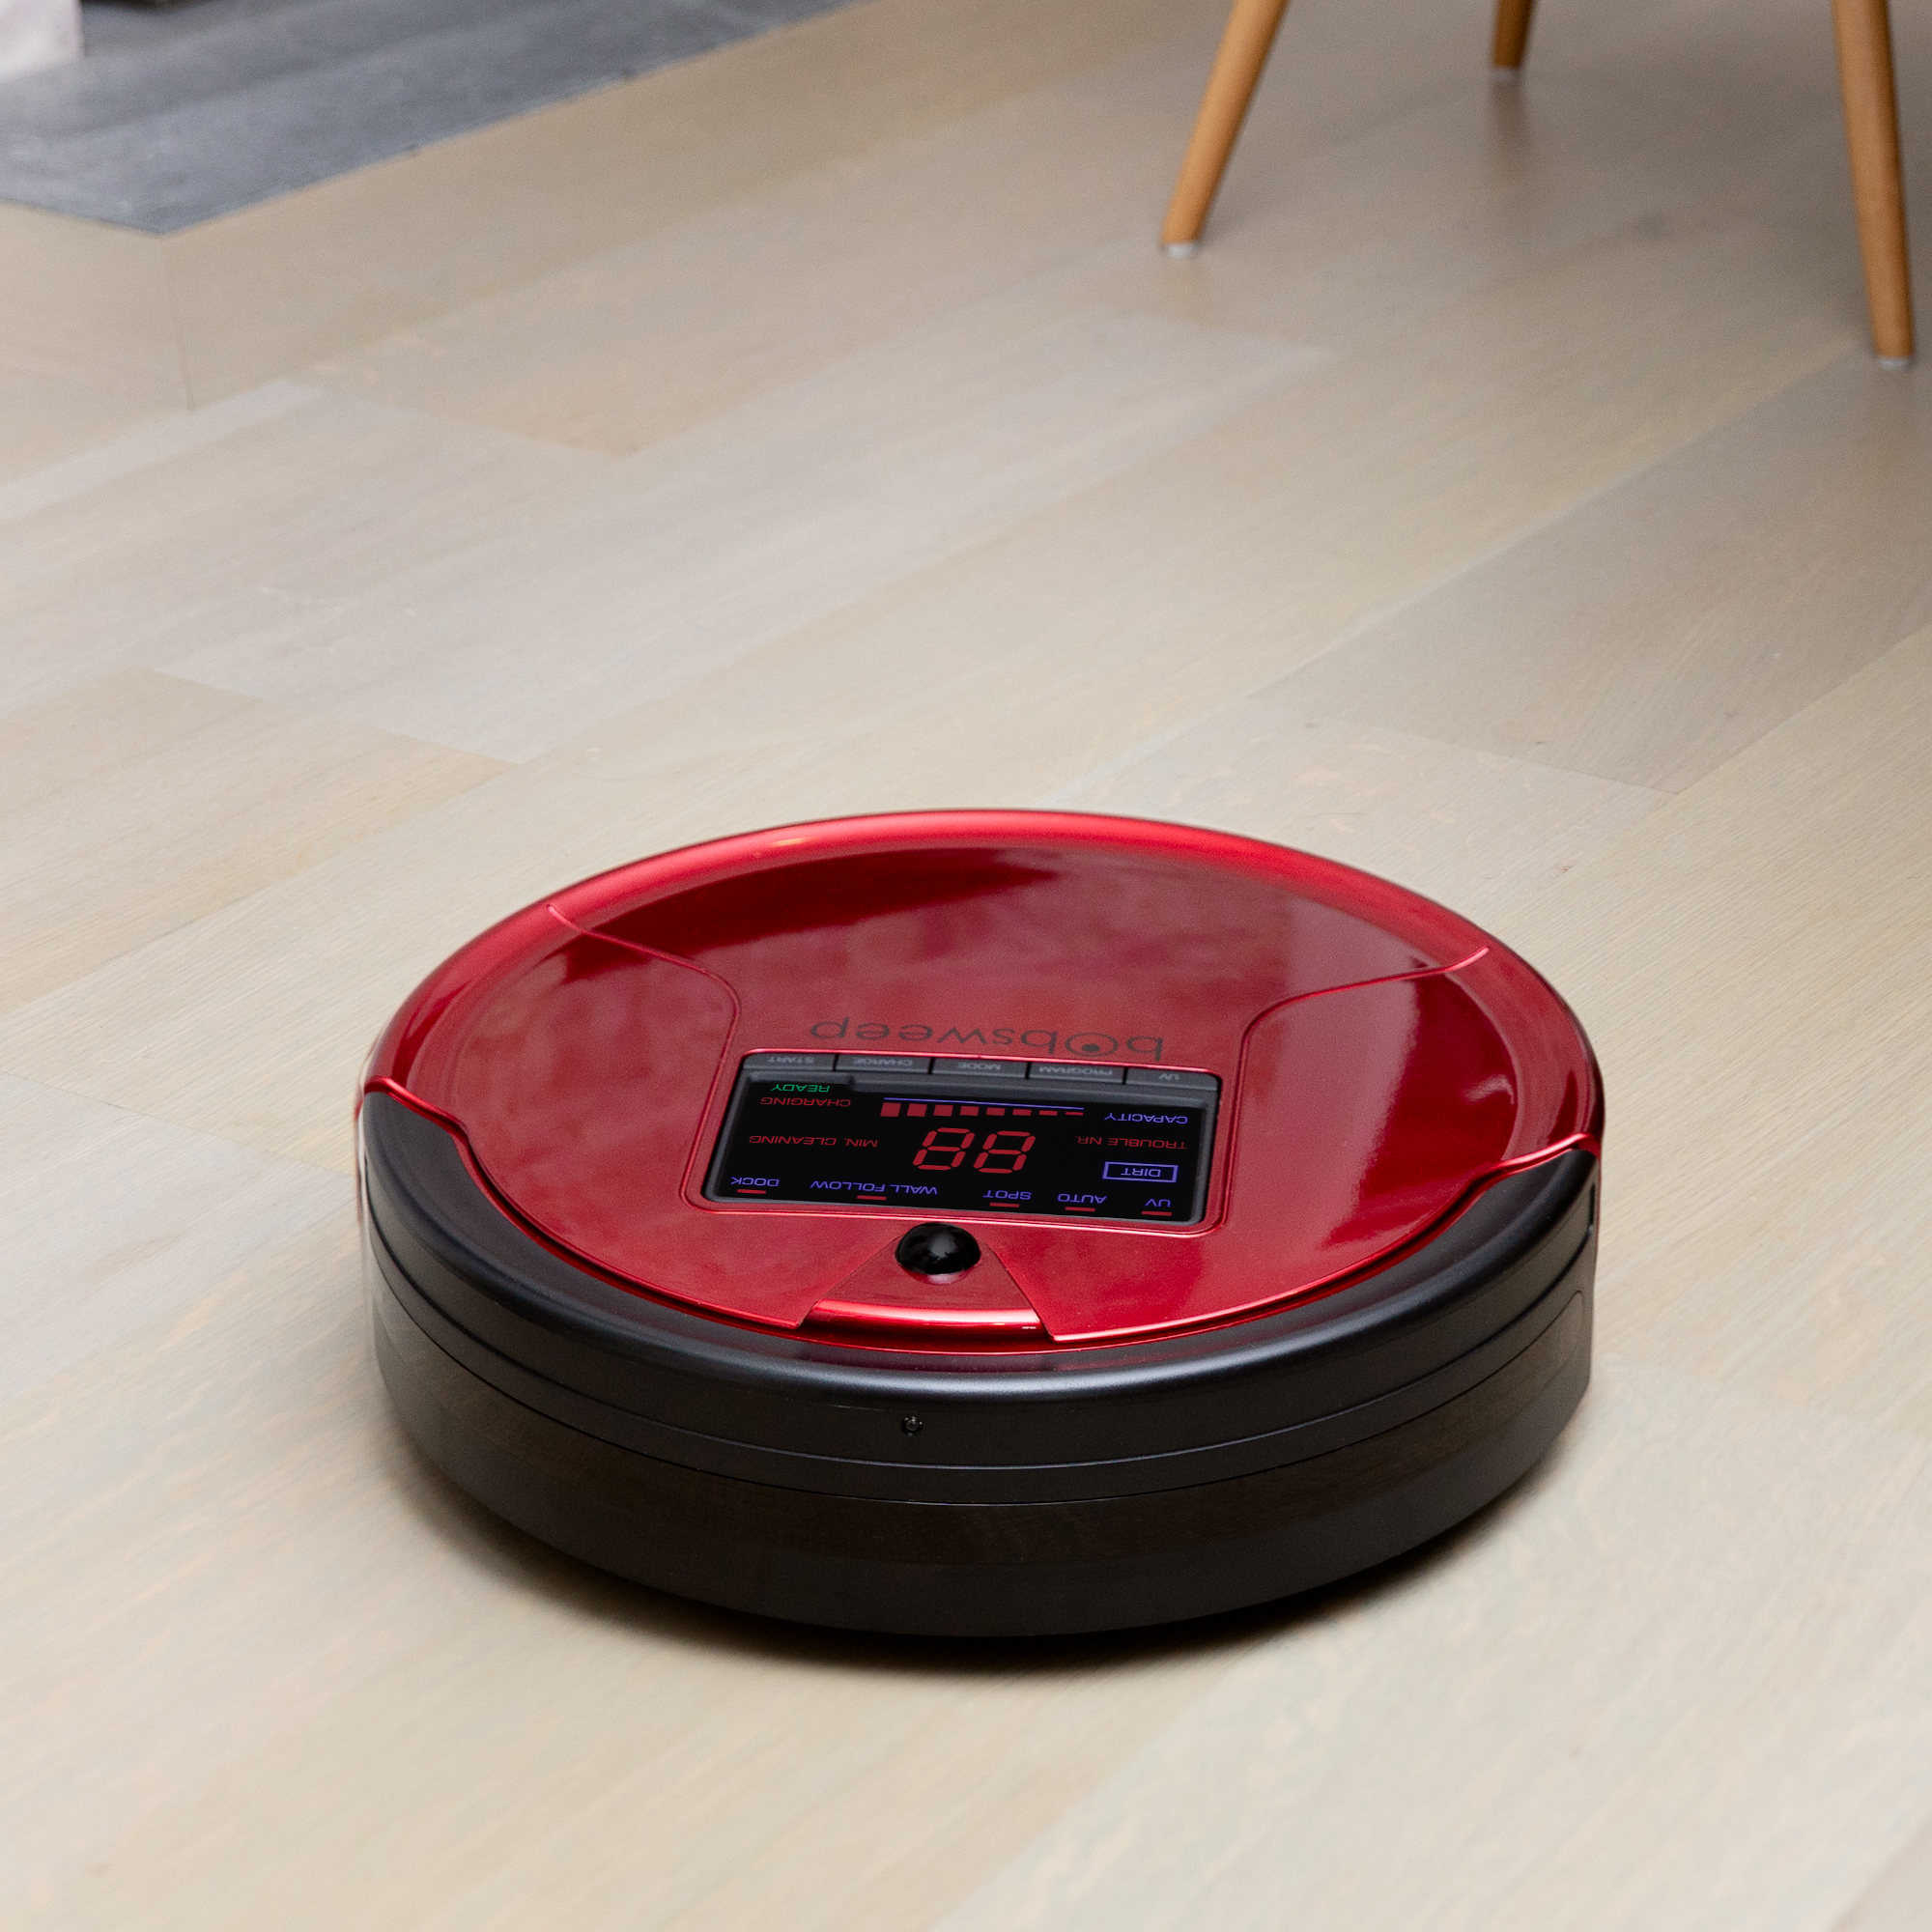 Bobsweep Pet Hair Robotic Vacuum Cleaner and Mop, Rouge - image 8 of 9